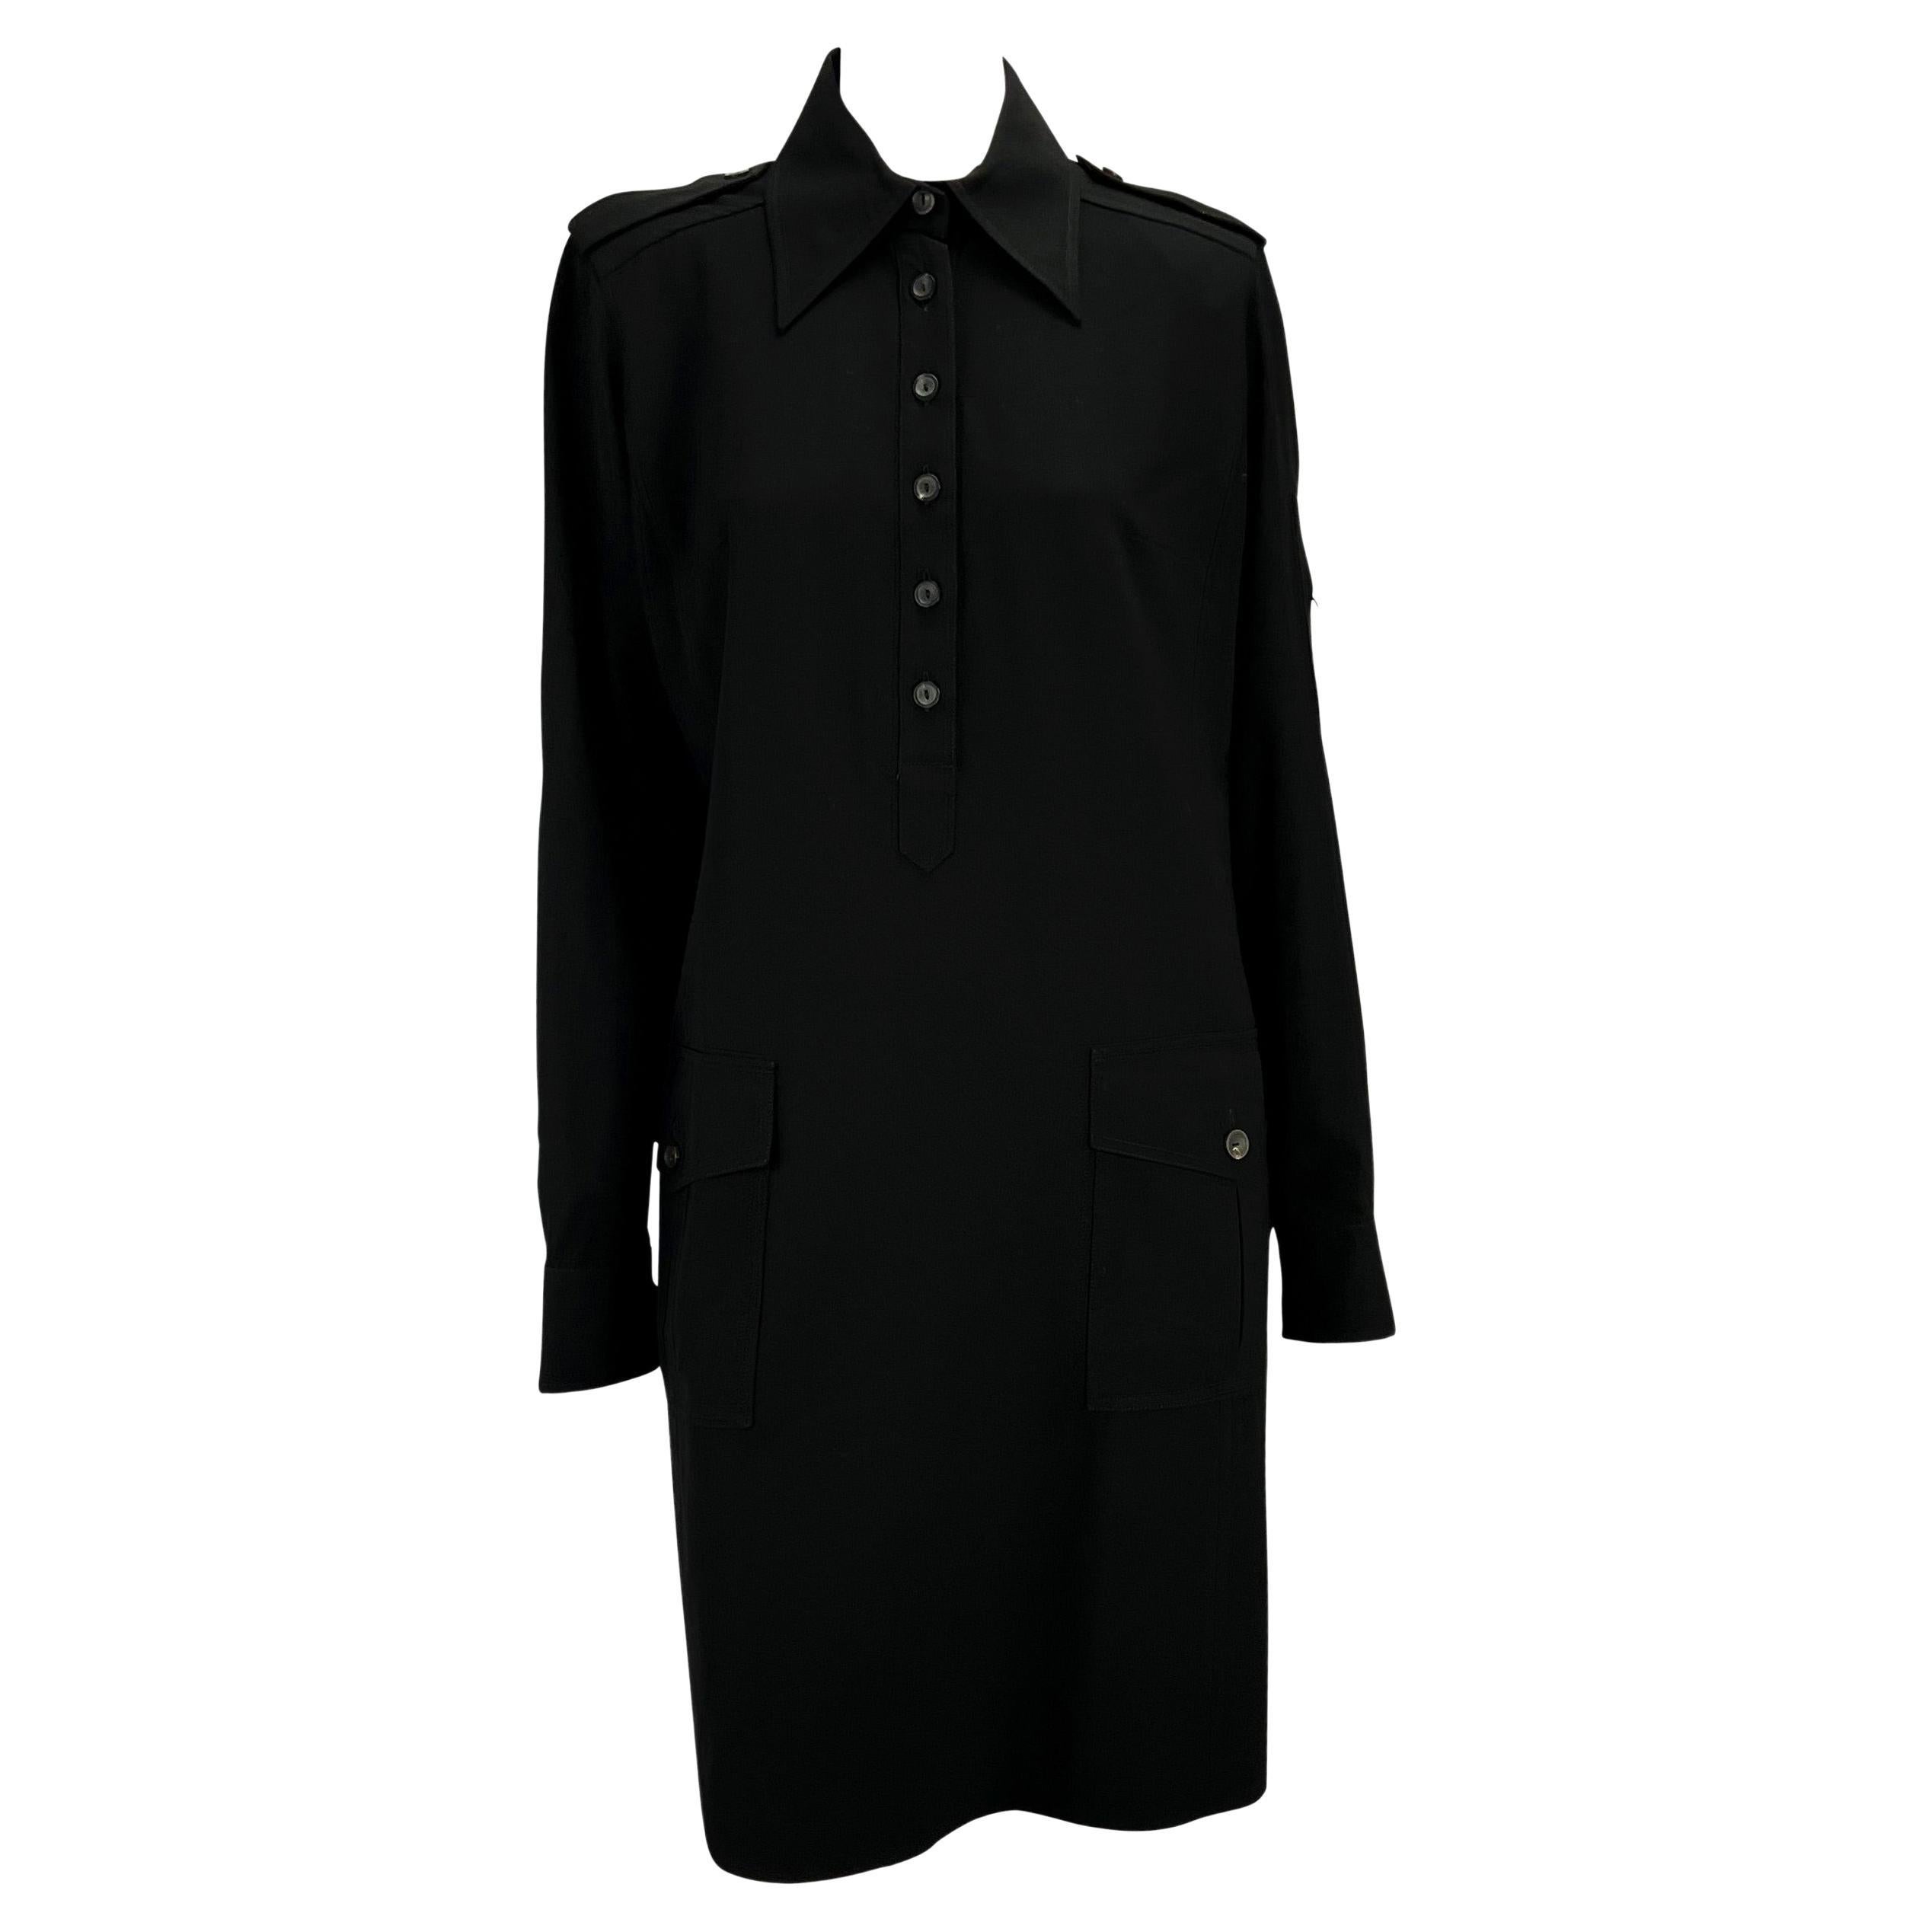 F/W 1996 Gucci by Tom Ford Black Epaulet Military Pocket Dress For Sale